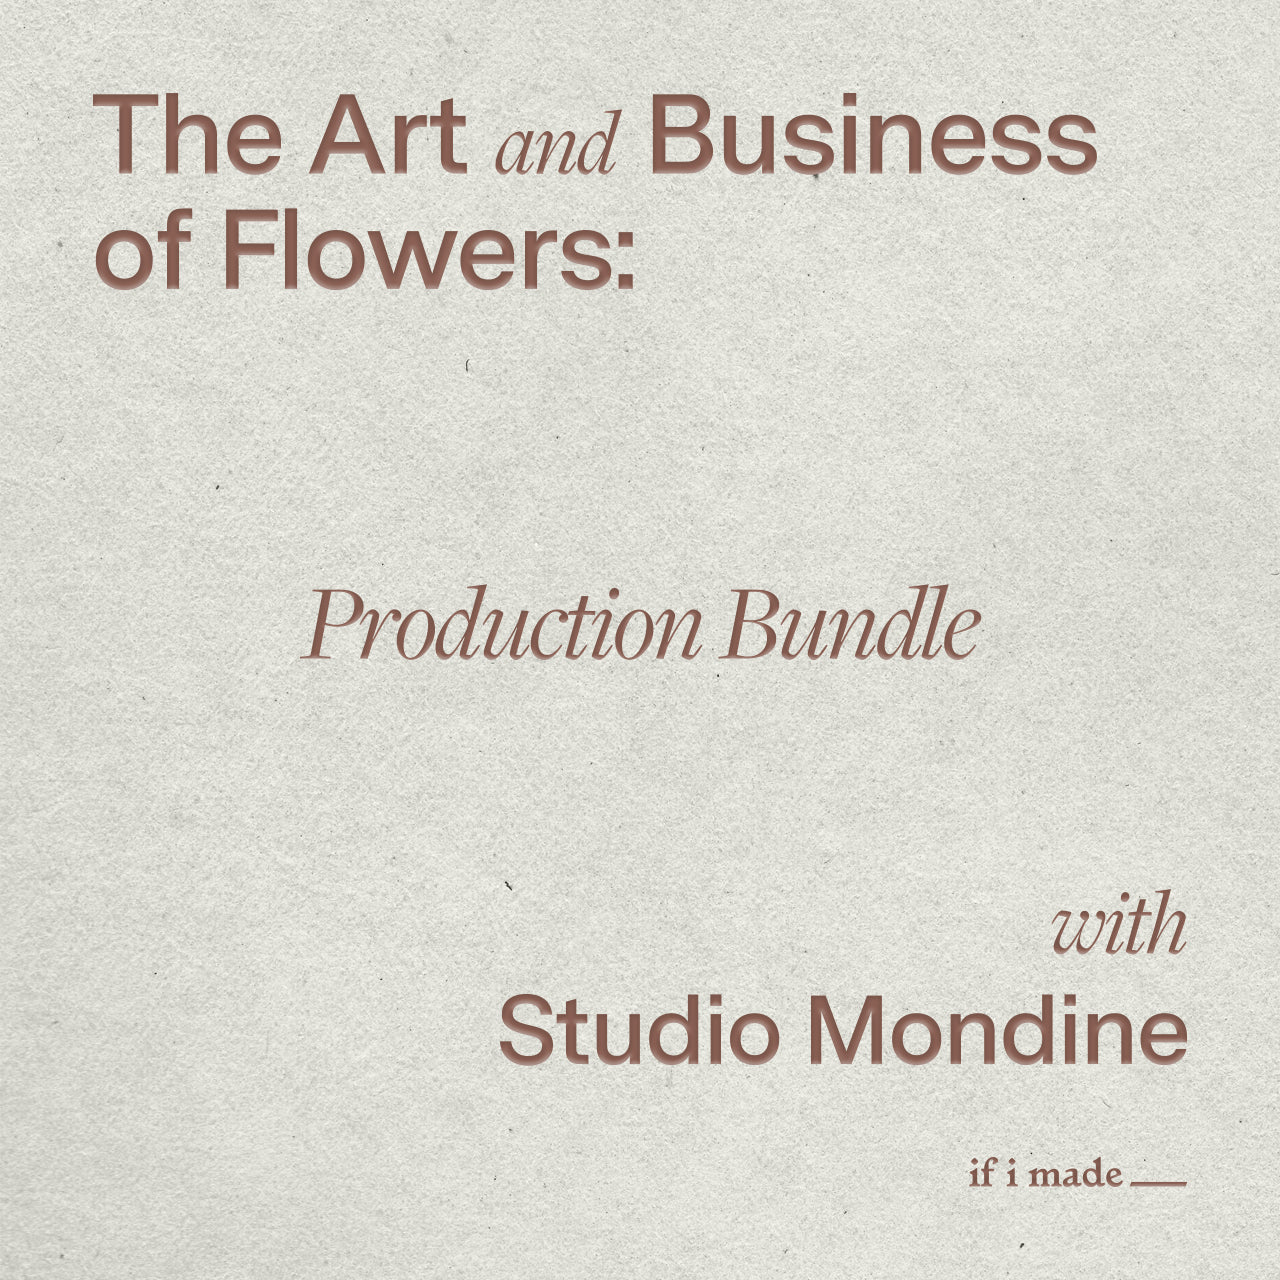 The Art and Business of Flowers with Studio Mondine: Production Bundle -  6 payments of $99 (SPP0222)